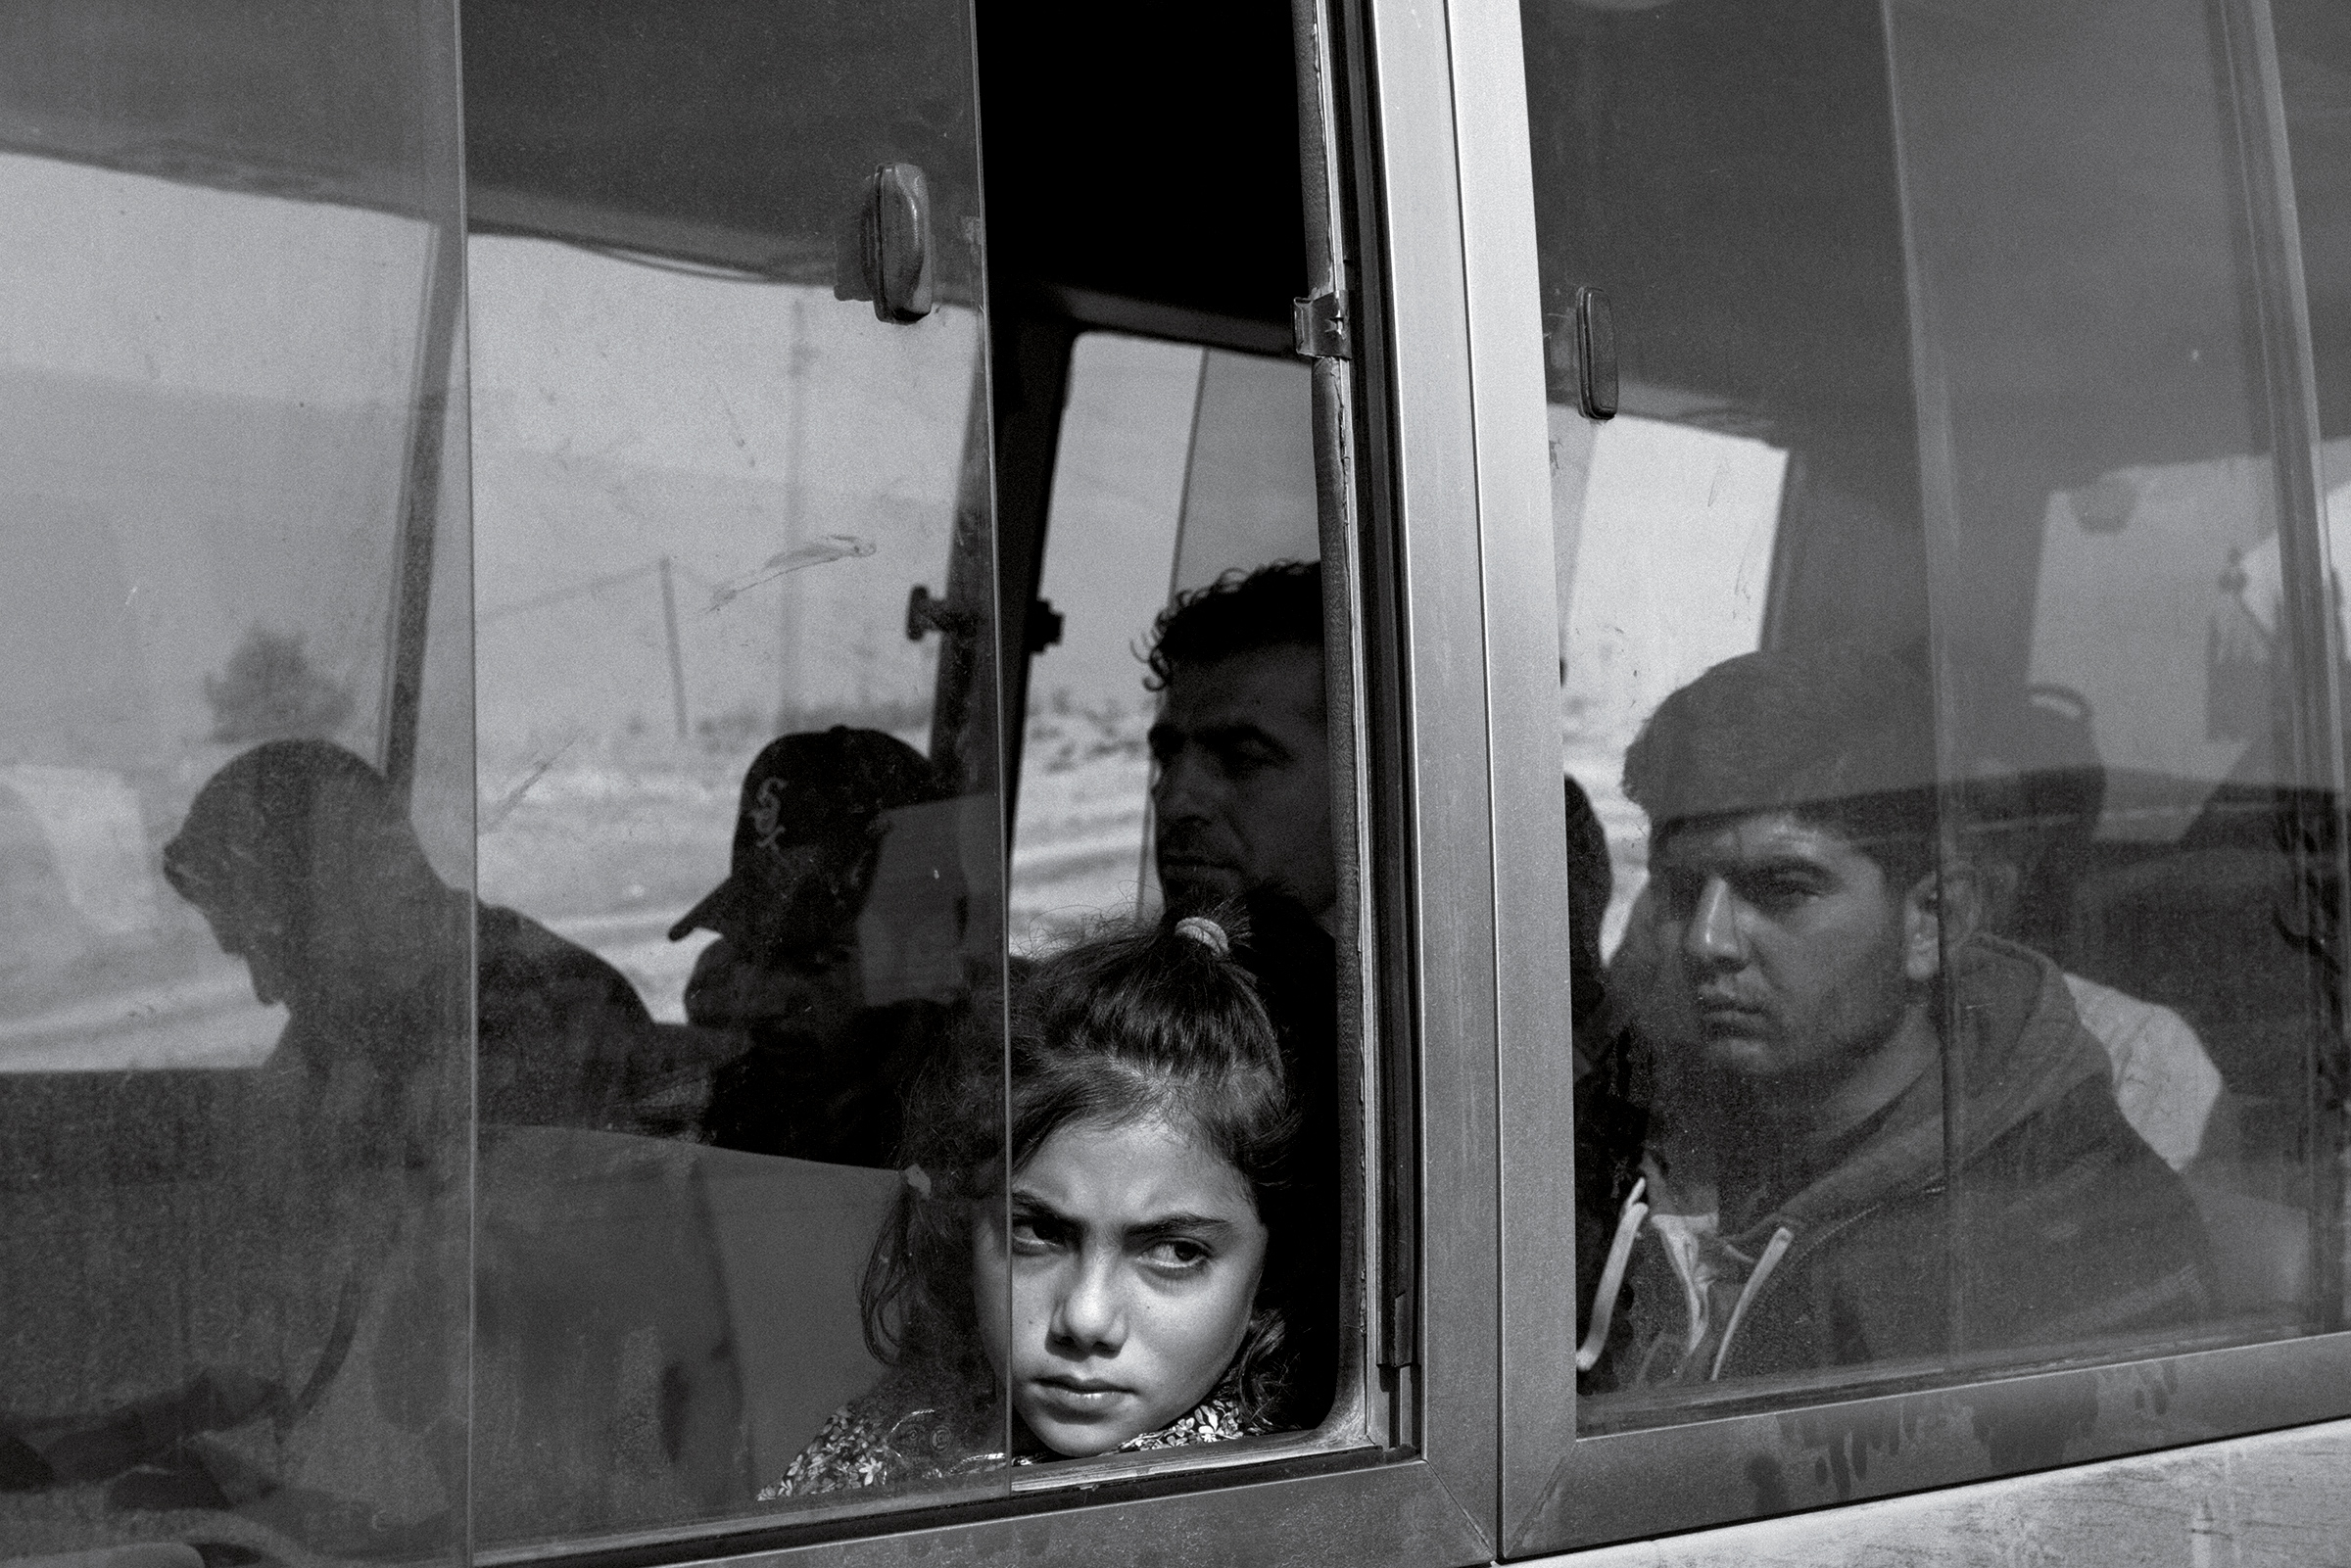 Nuhat Abdul Hamid, 9, from the Syrian Kurdish town of Darbasiyah, aboard a bus transporting refugees to the Bardarash camp in Iraq on Nov. 1. Nov. 25 issue. (Moises Saman—Magnum Photos for TIME)